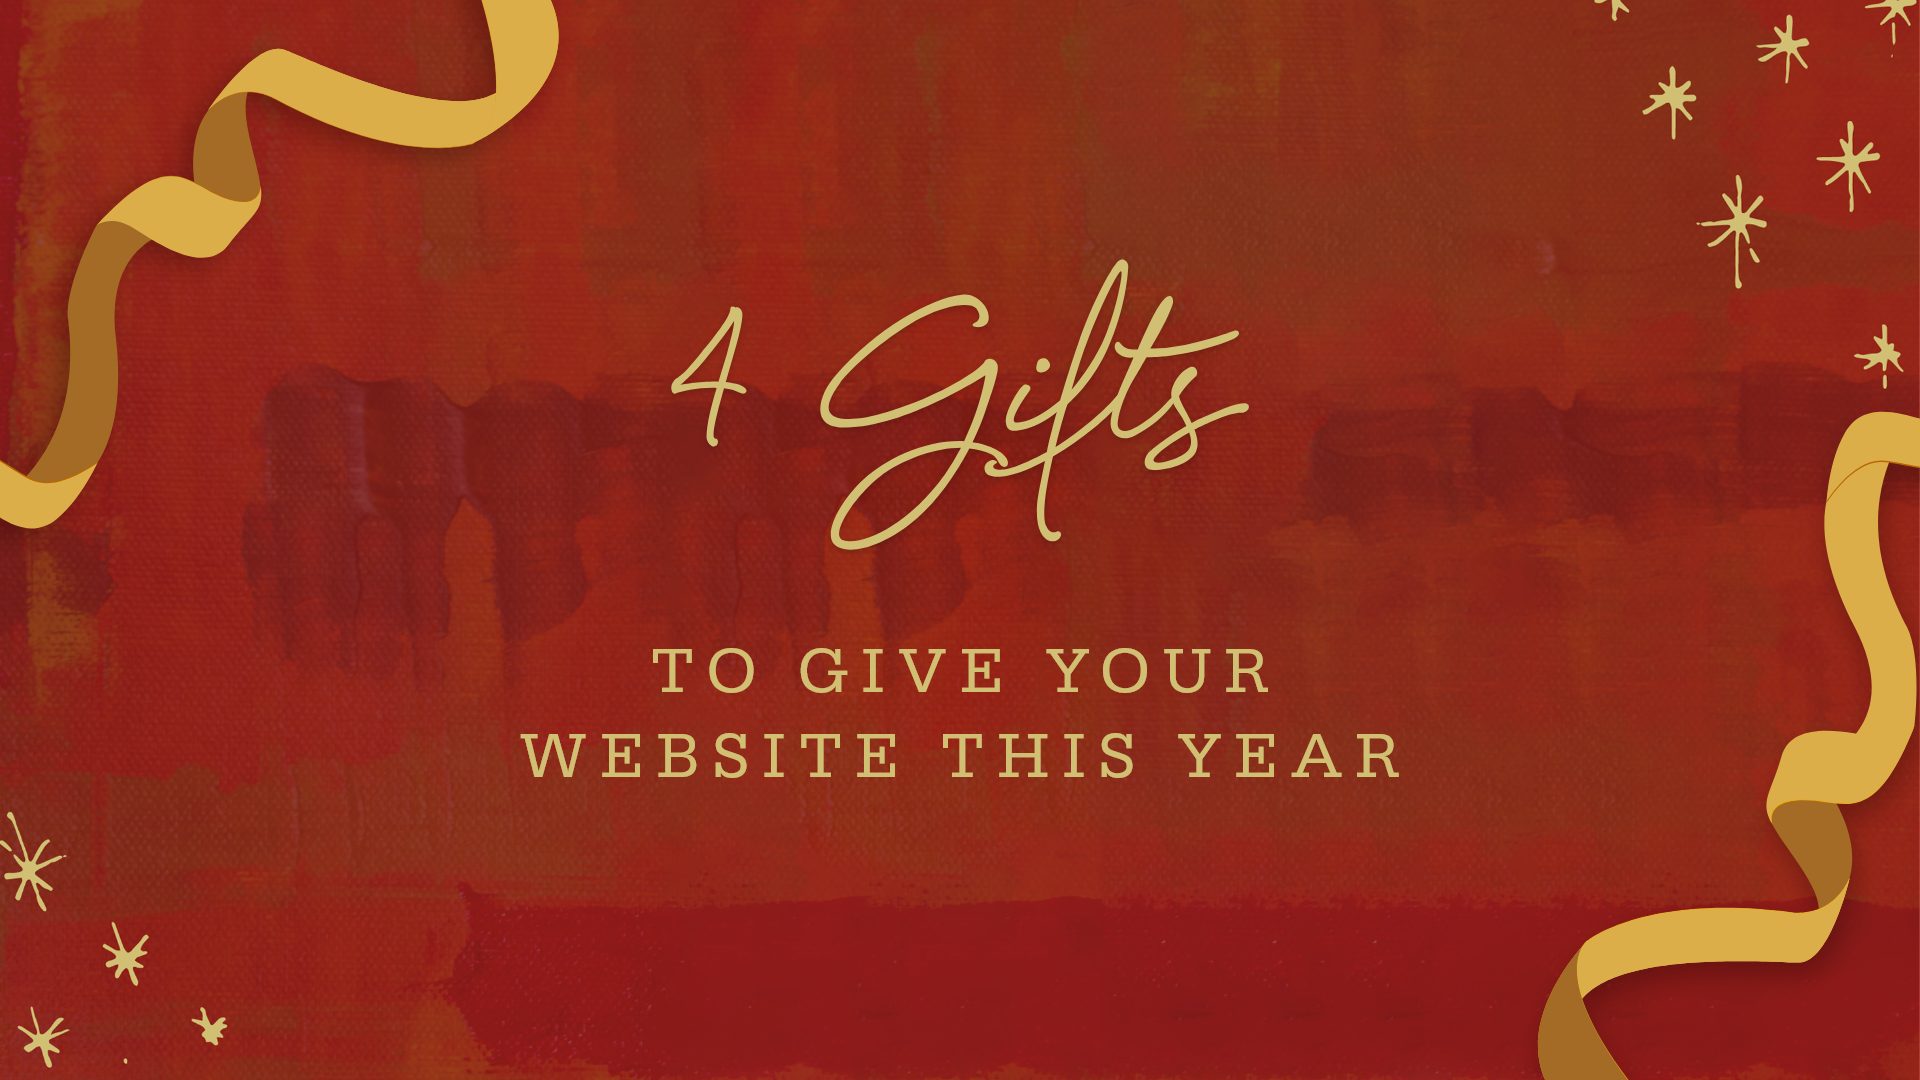 4 Gifts to Give Your Website